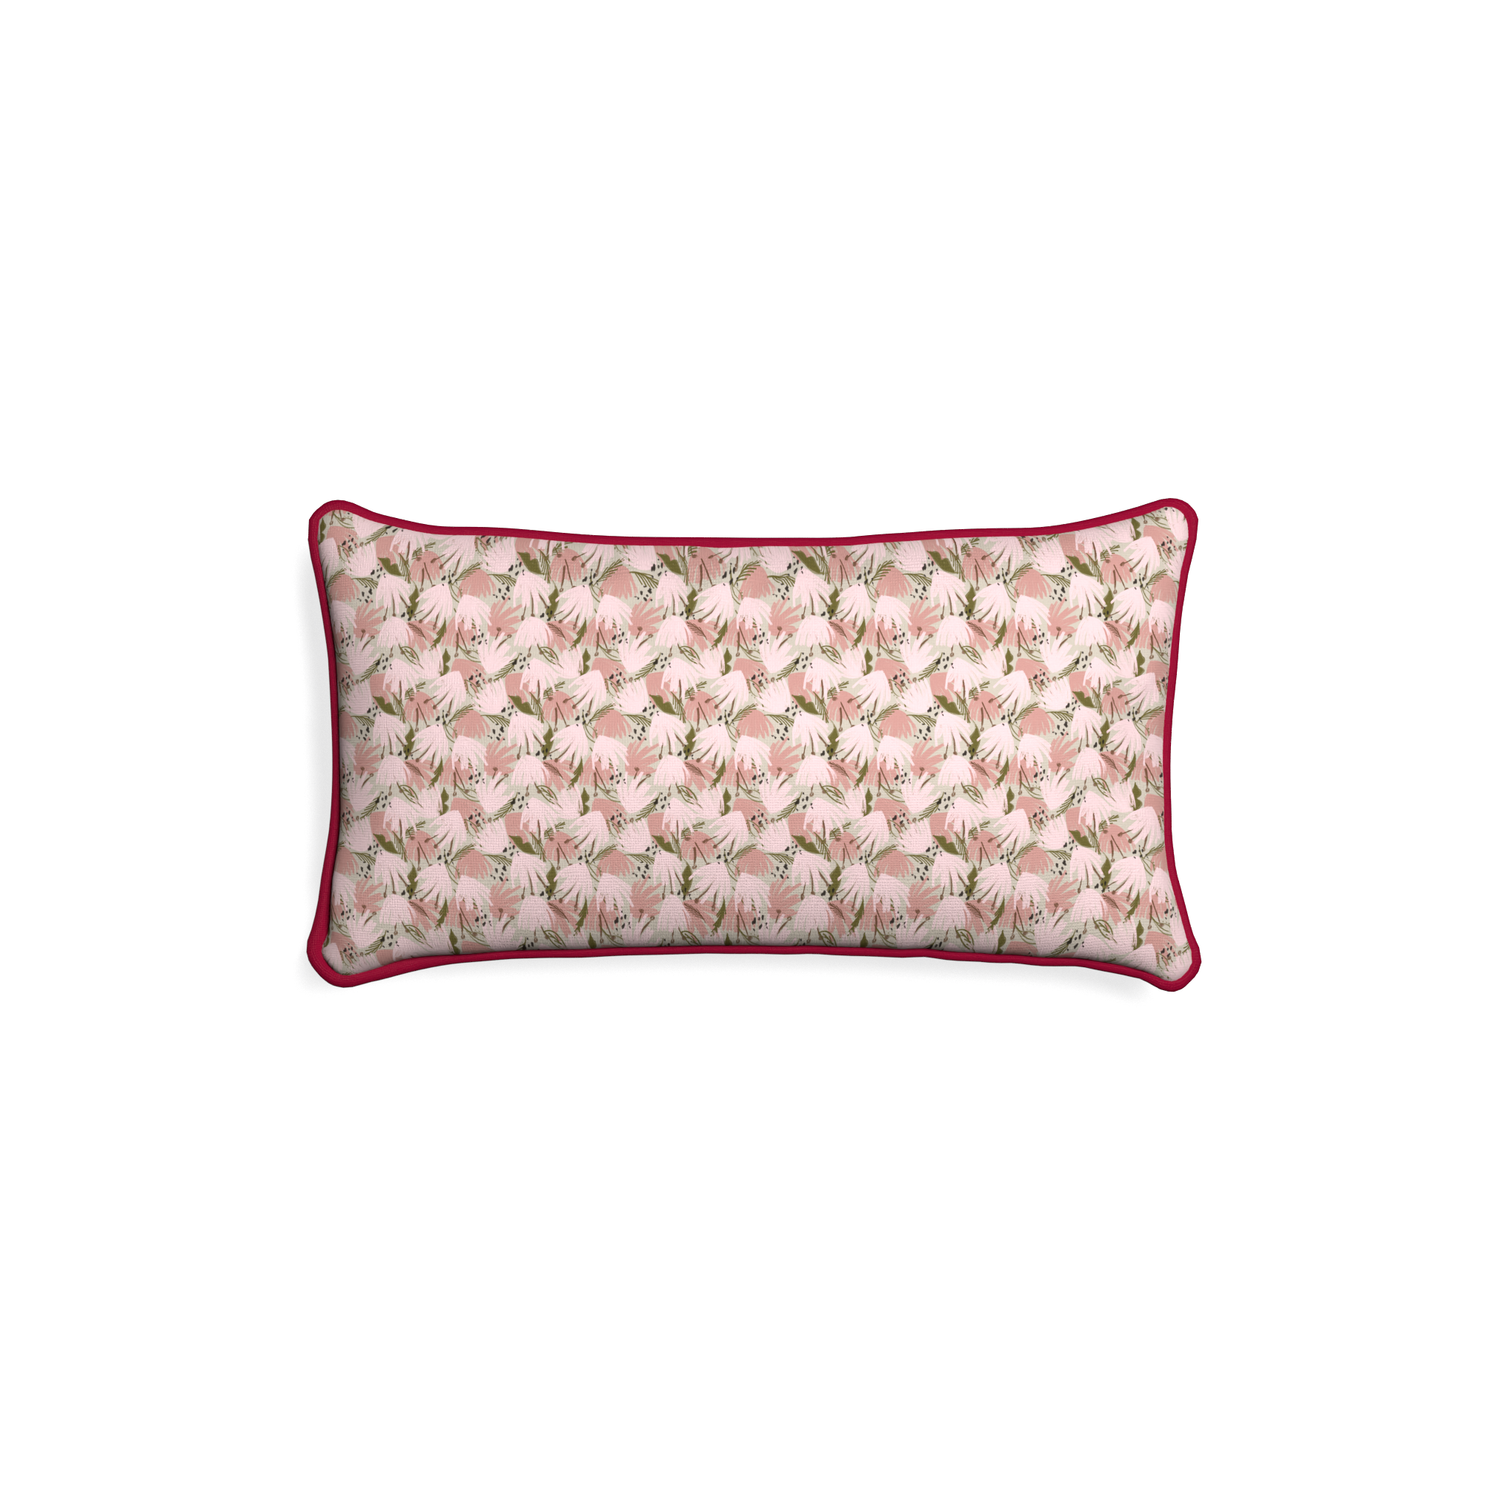 Petite-lumbar eden pink custom pink floralpillow with raspberry piping on white background